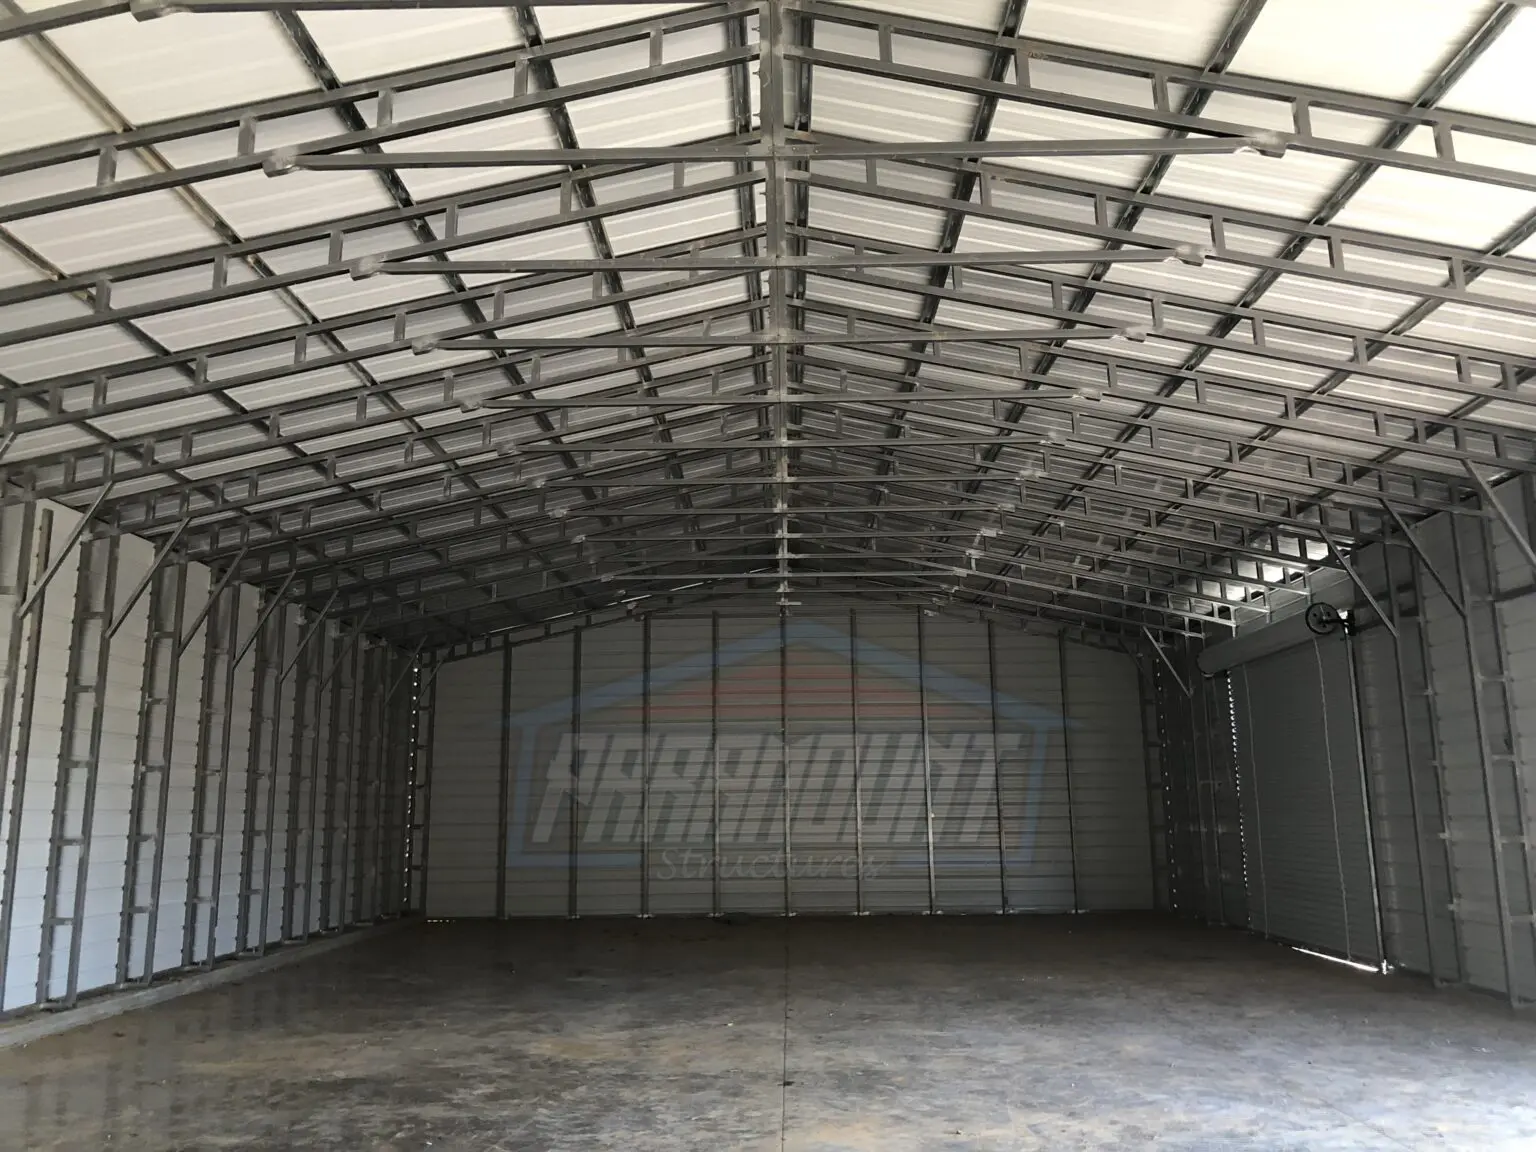 A garage with a metal roof and metal walls.